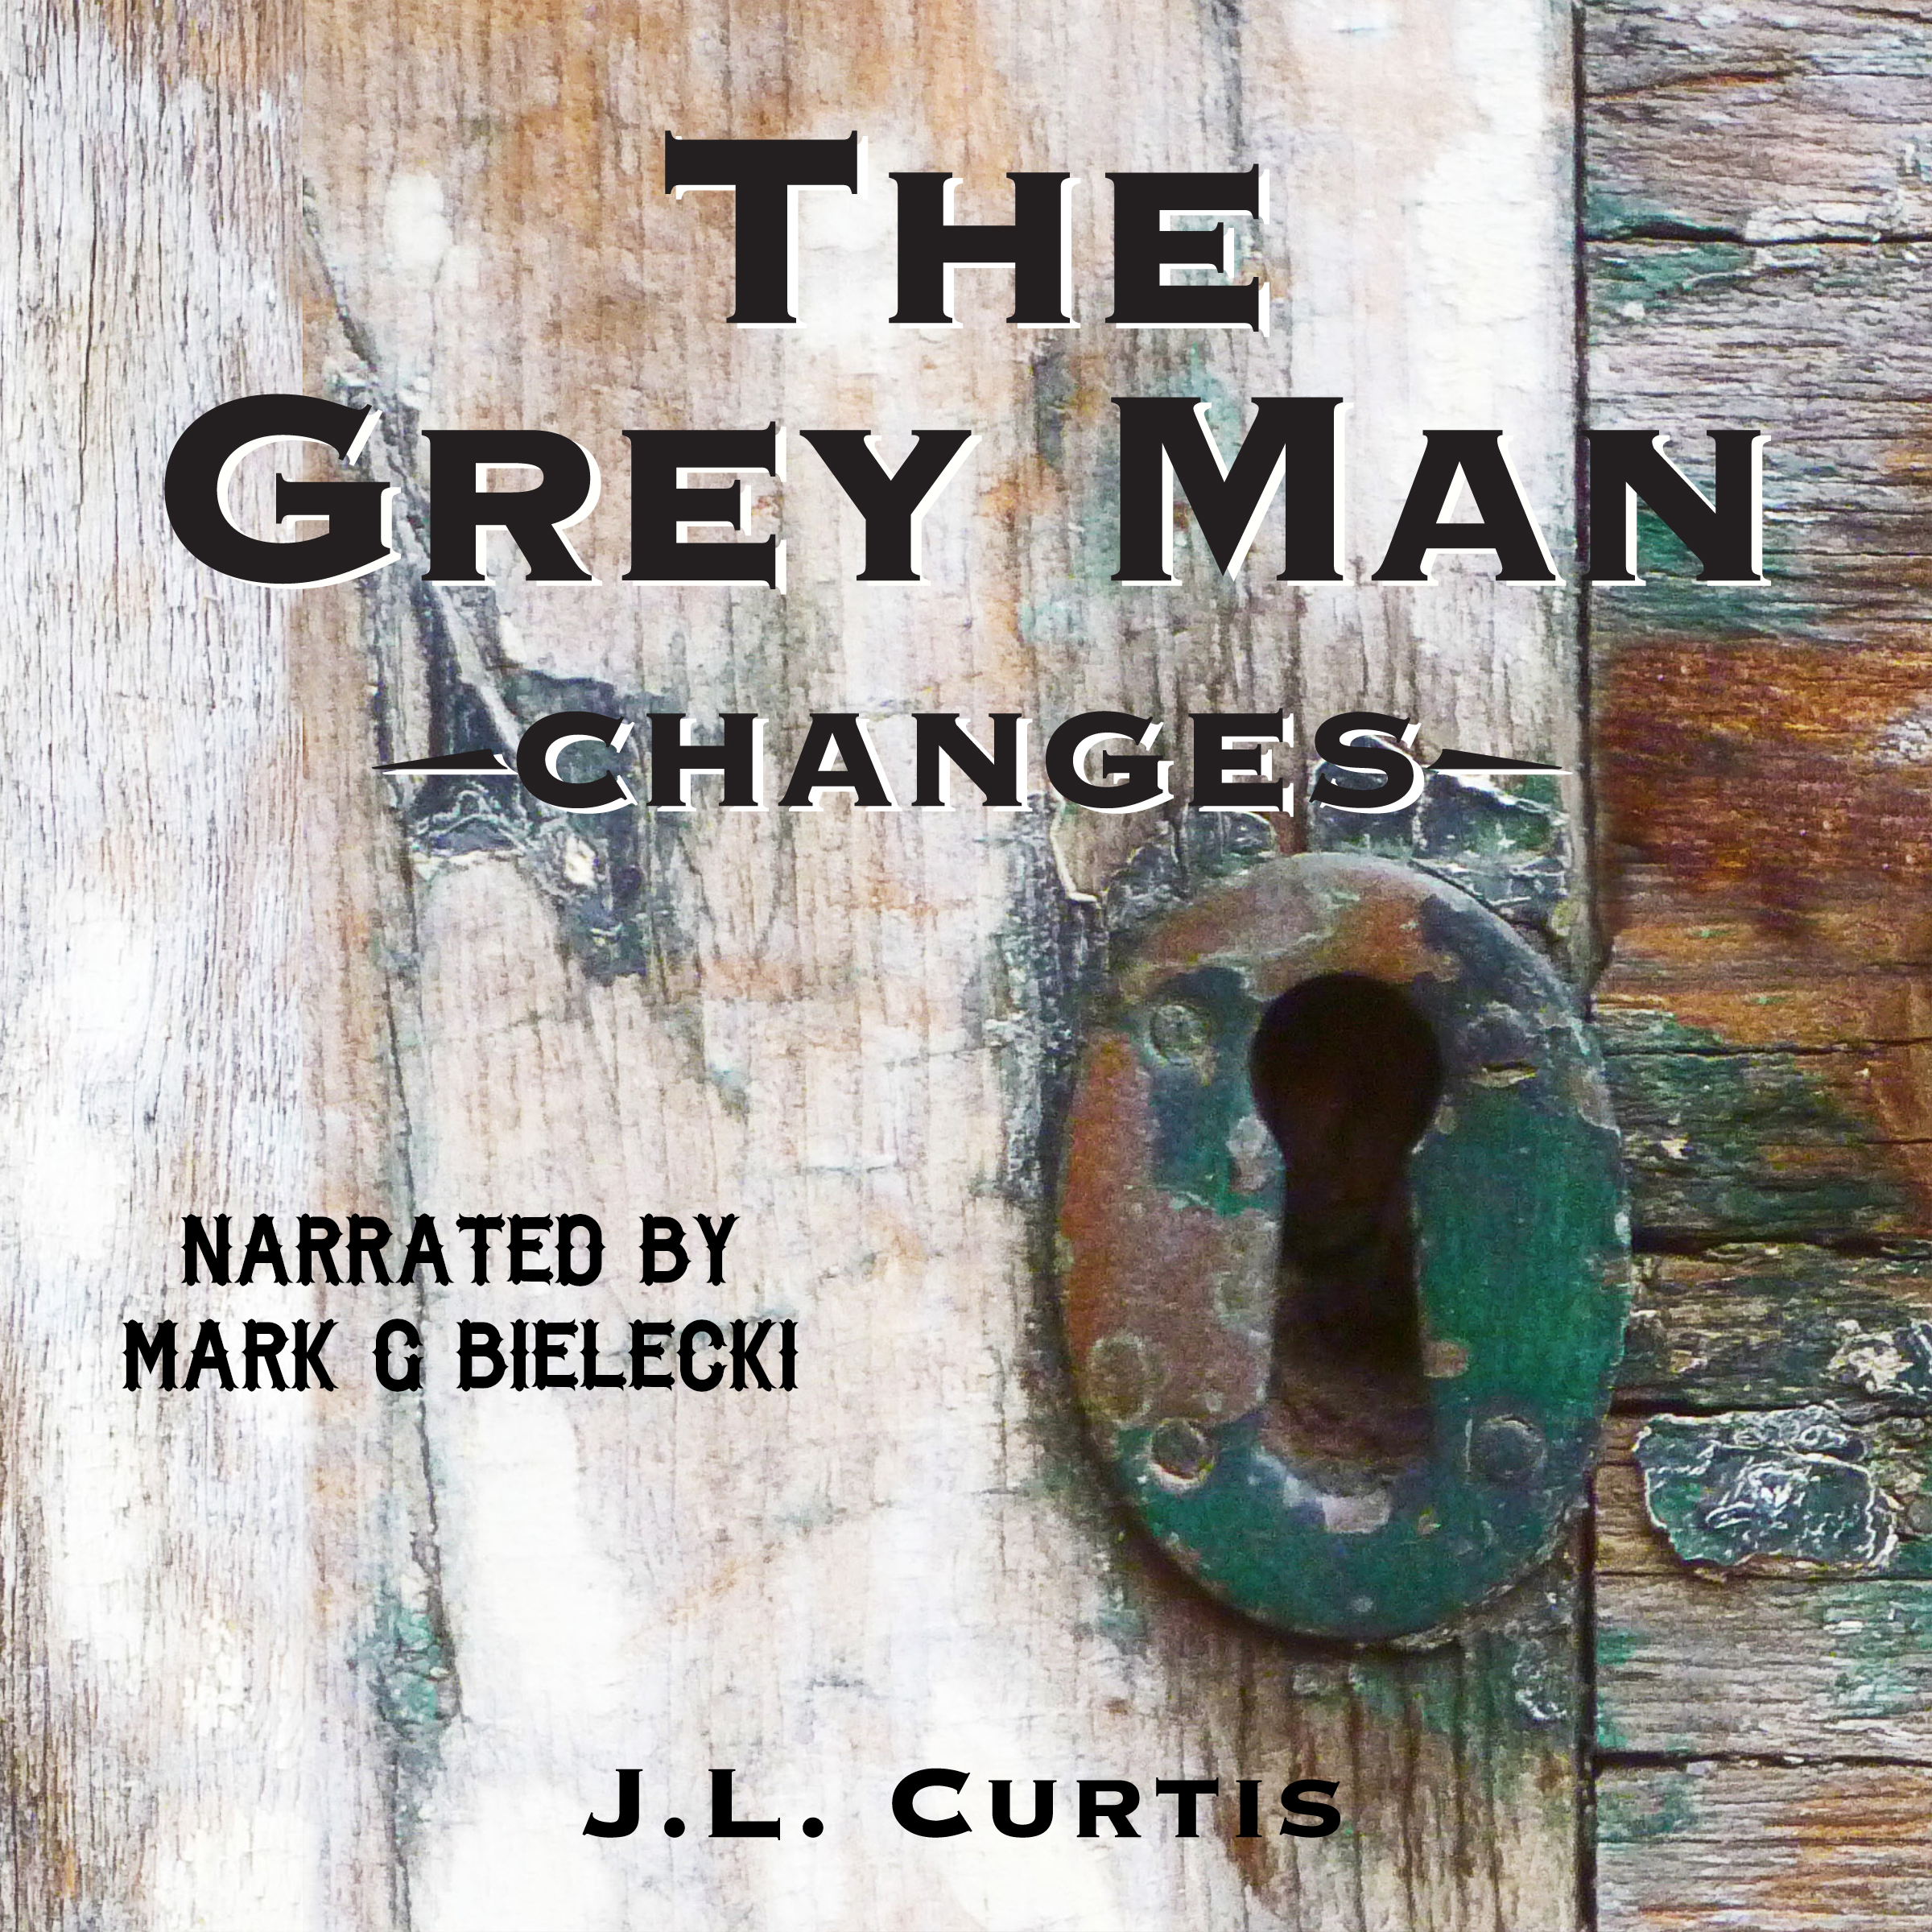 Looking for the next Crime Action Fiction listen? “The Grey Man: Changes”, now available on Audible!